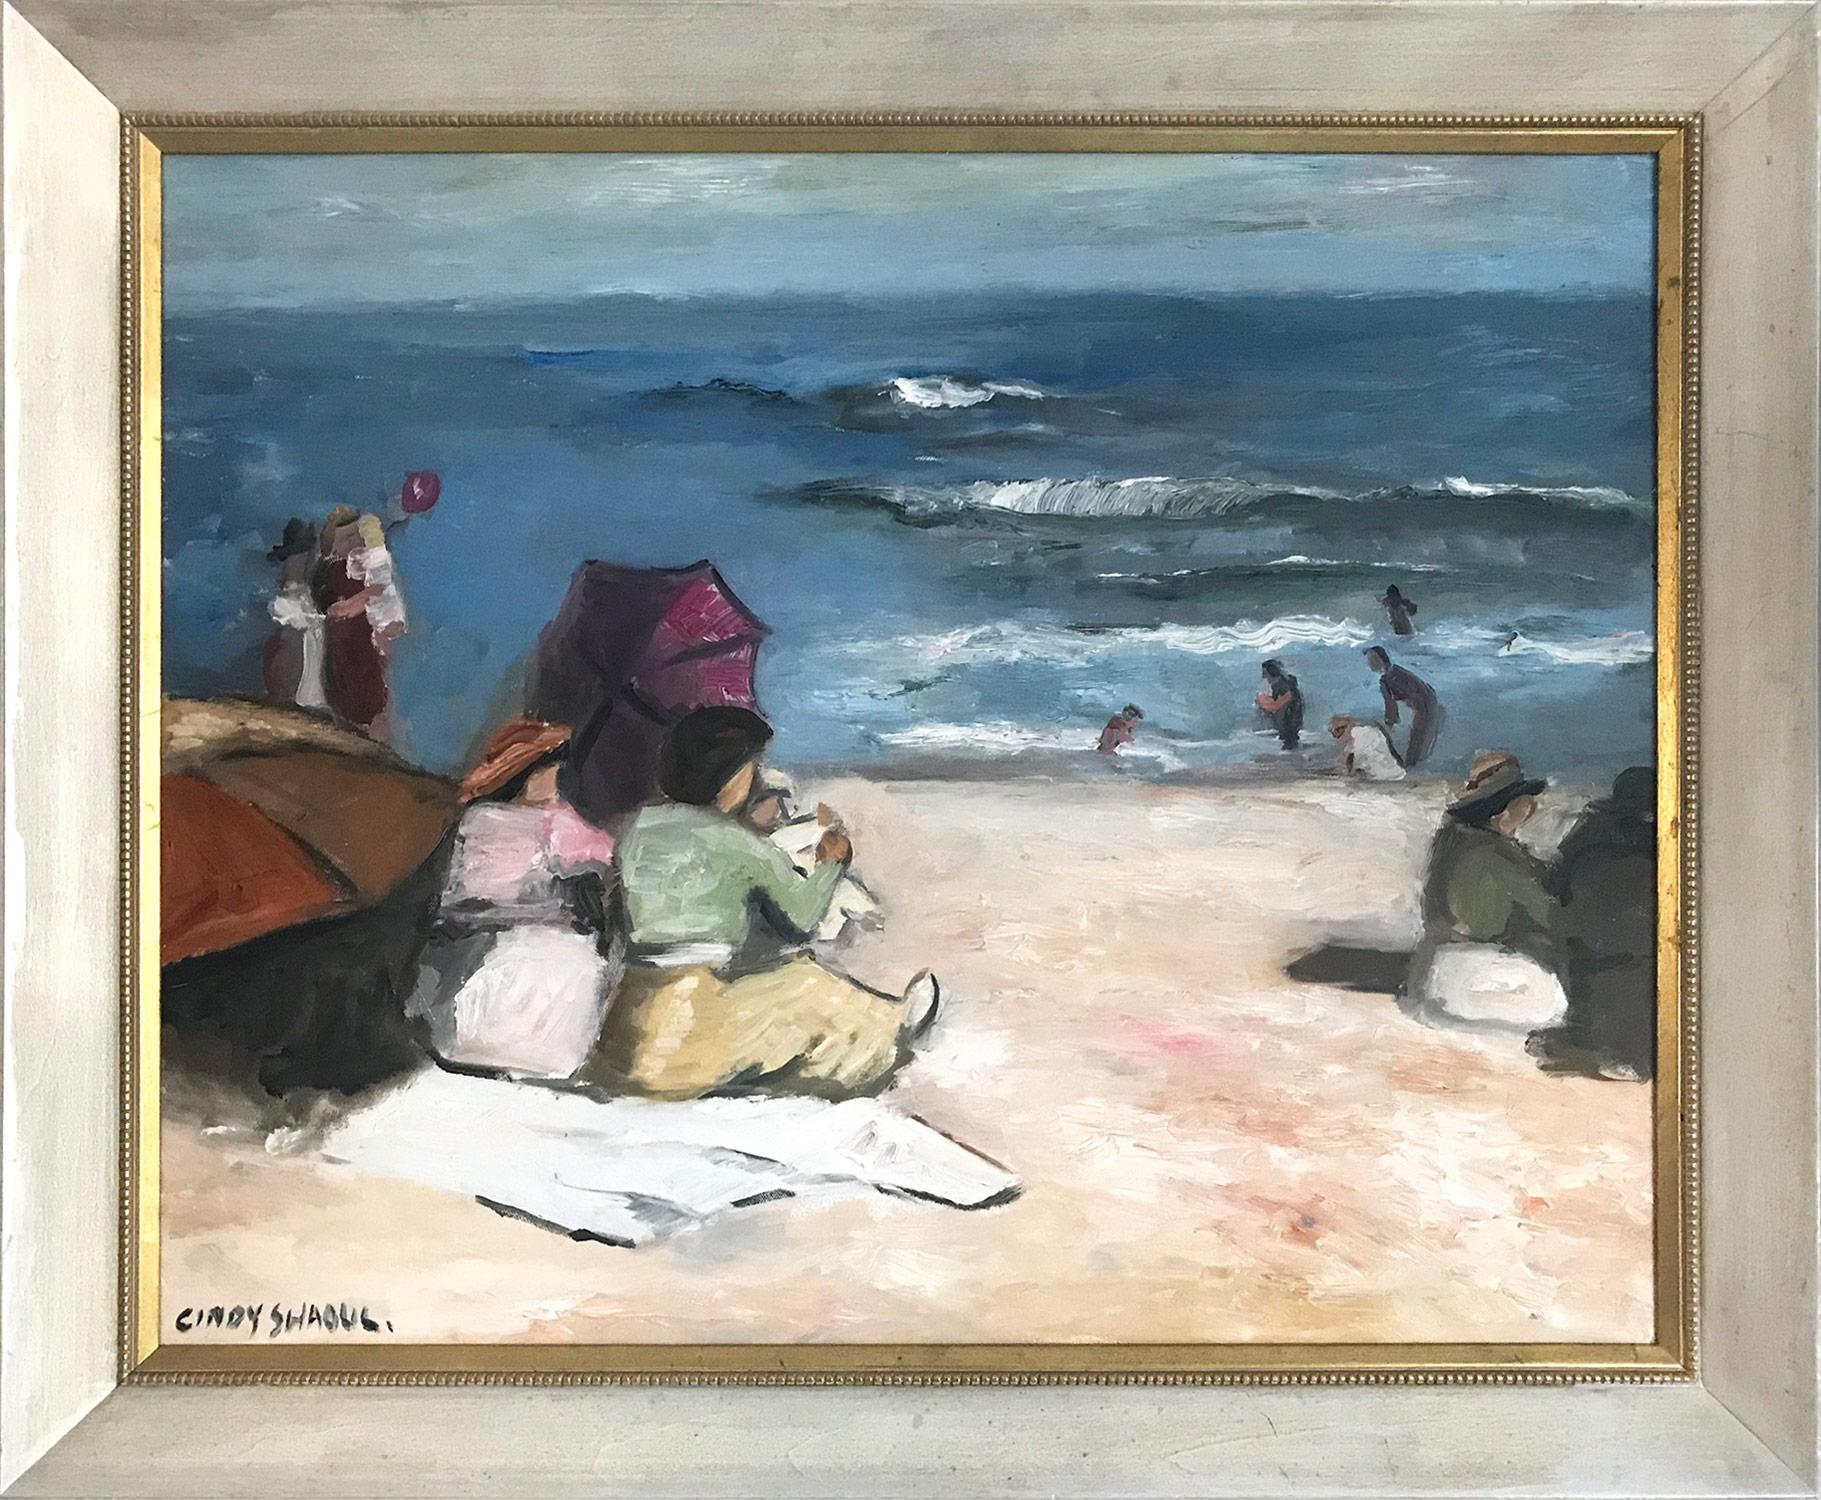 Cindy Shaoul Figurative Painting - "Playing at the Beach" Impressionistic Oil Painting after Edward Henry Potthast